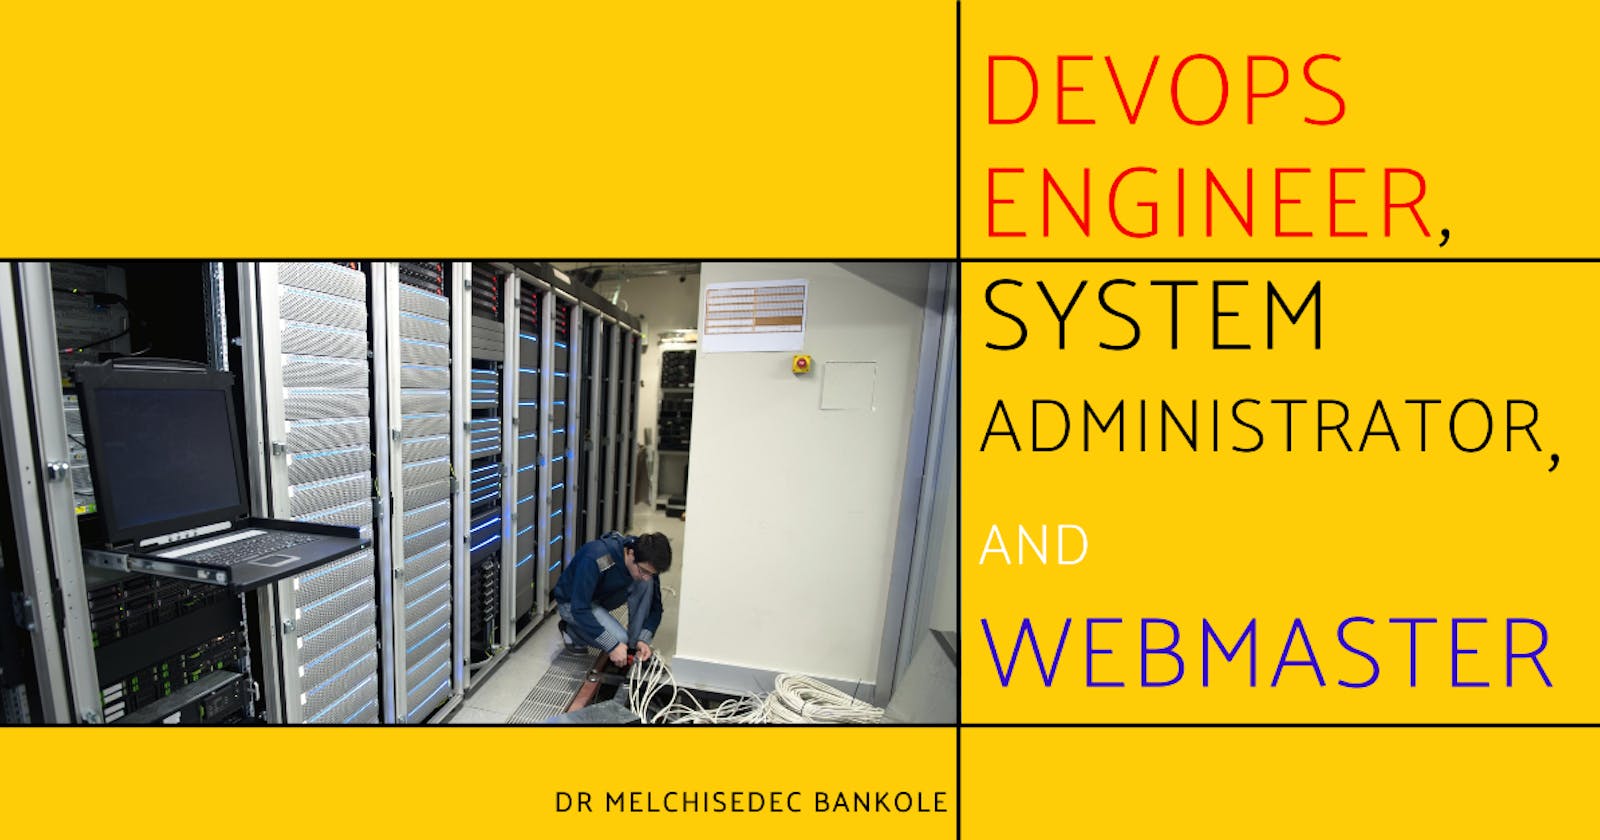 The Distinctions Between DevOps Engineers, System Administrators, and Webmasters